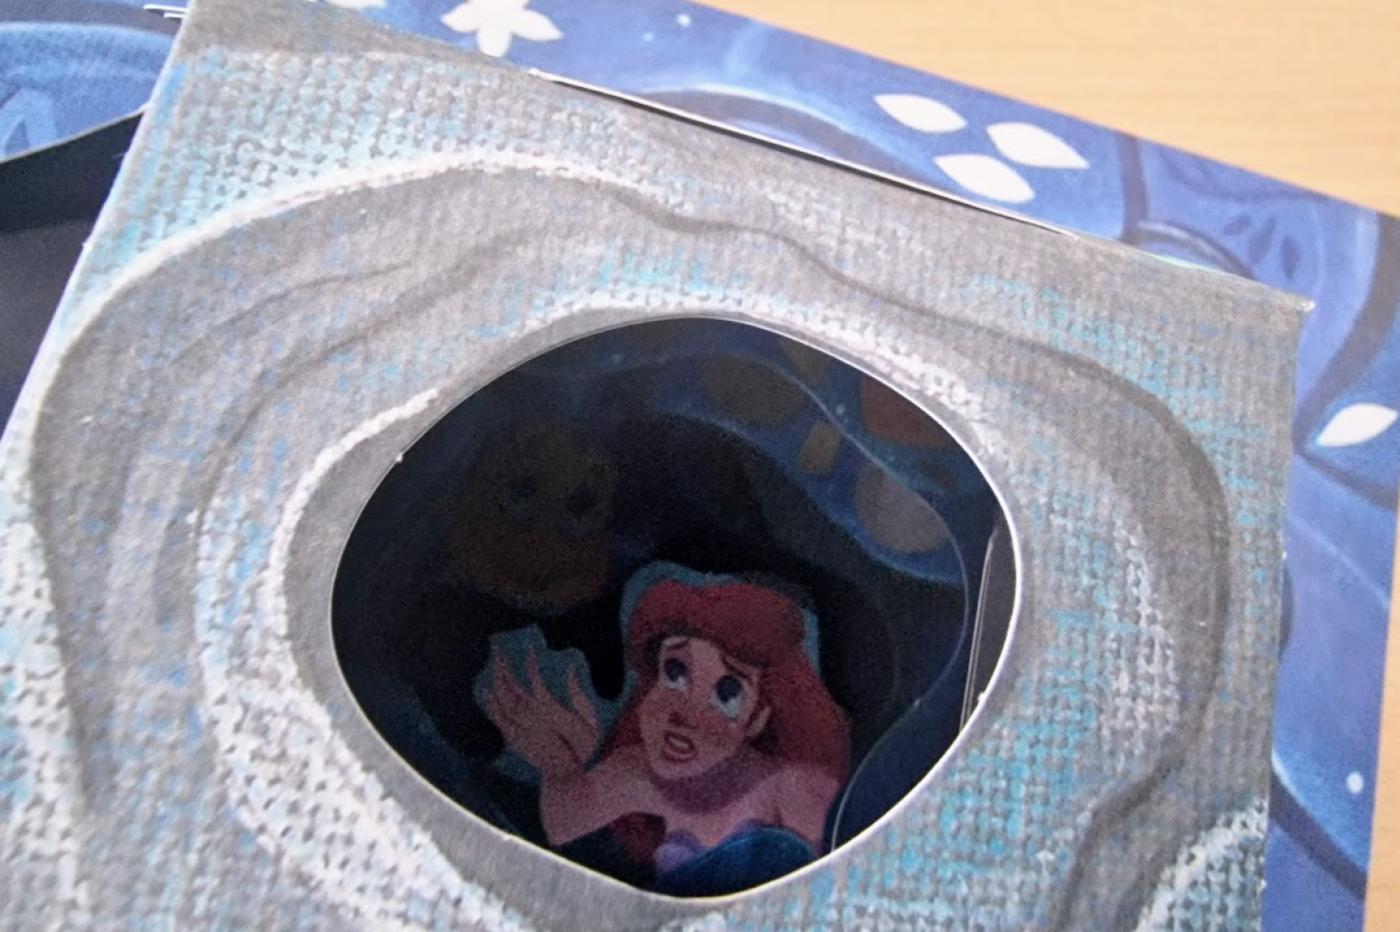 The little mermaid pop up book